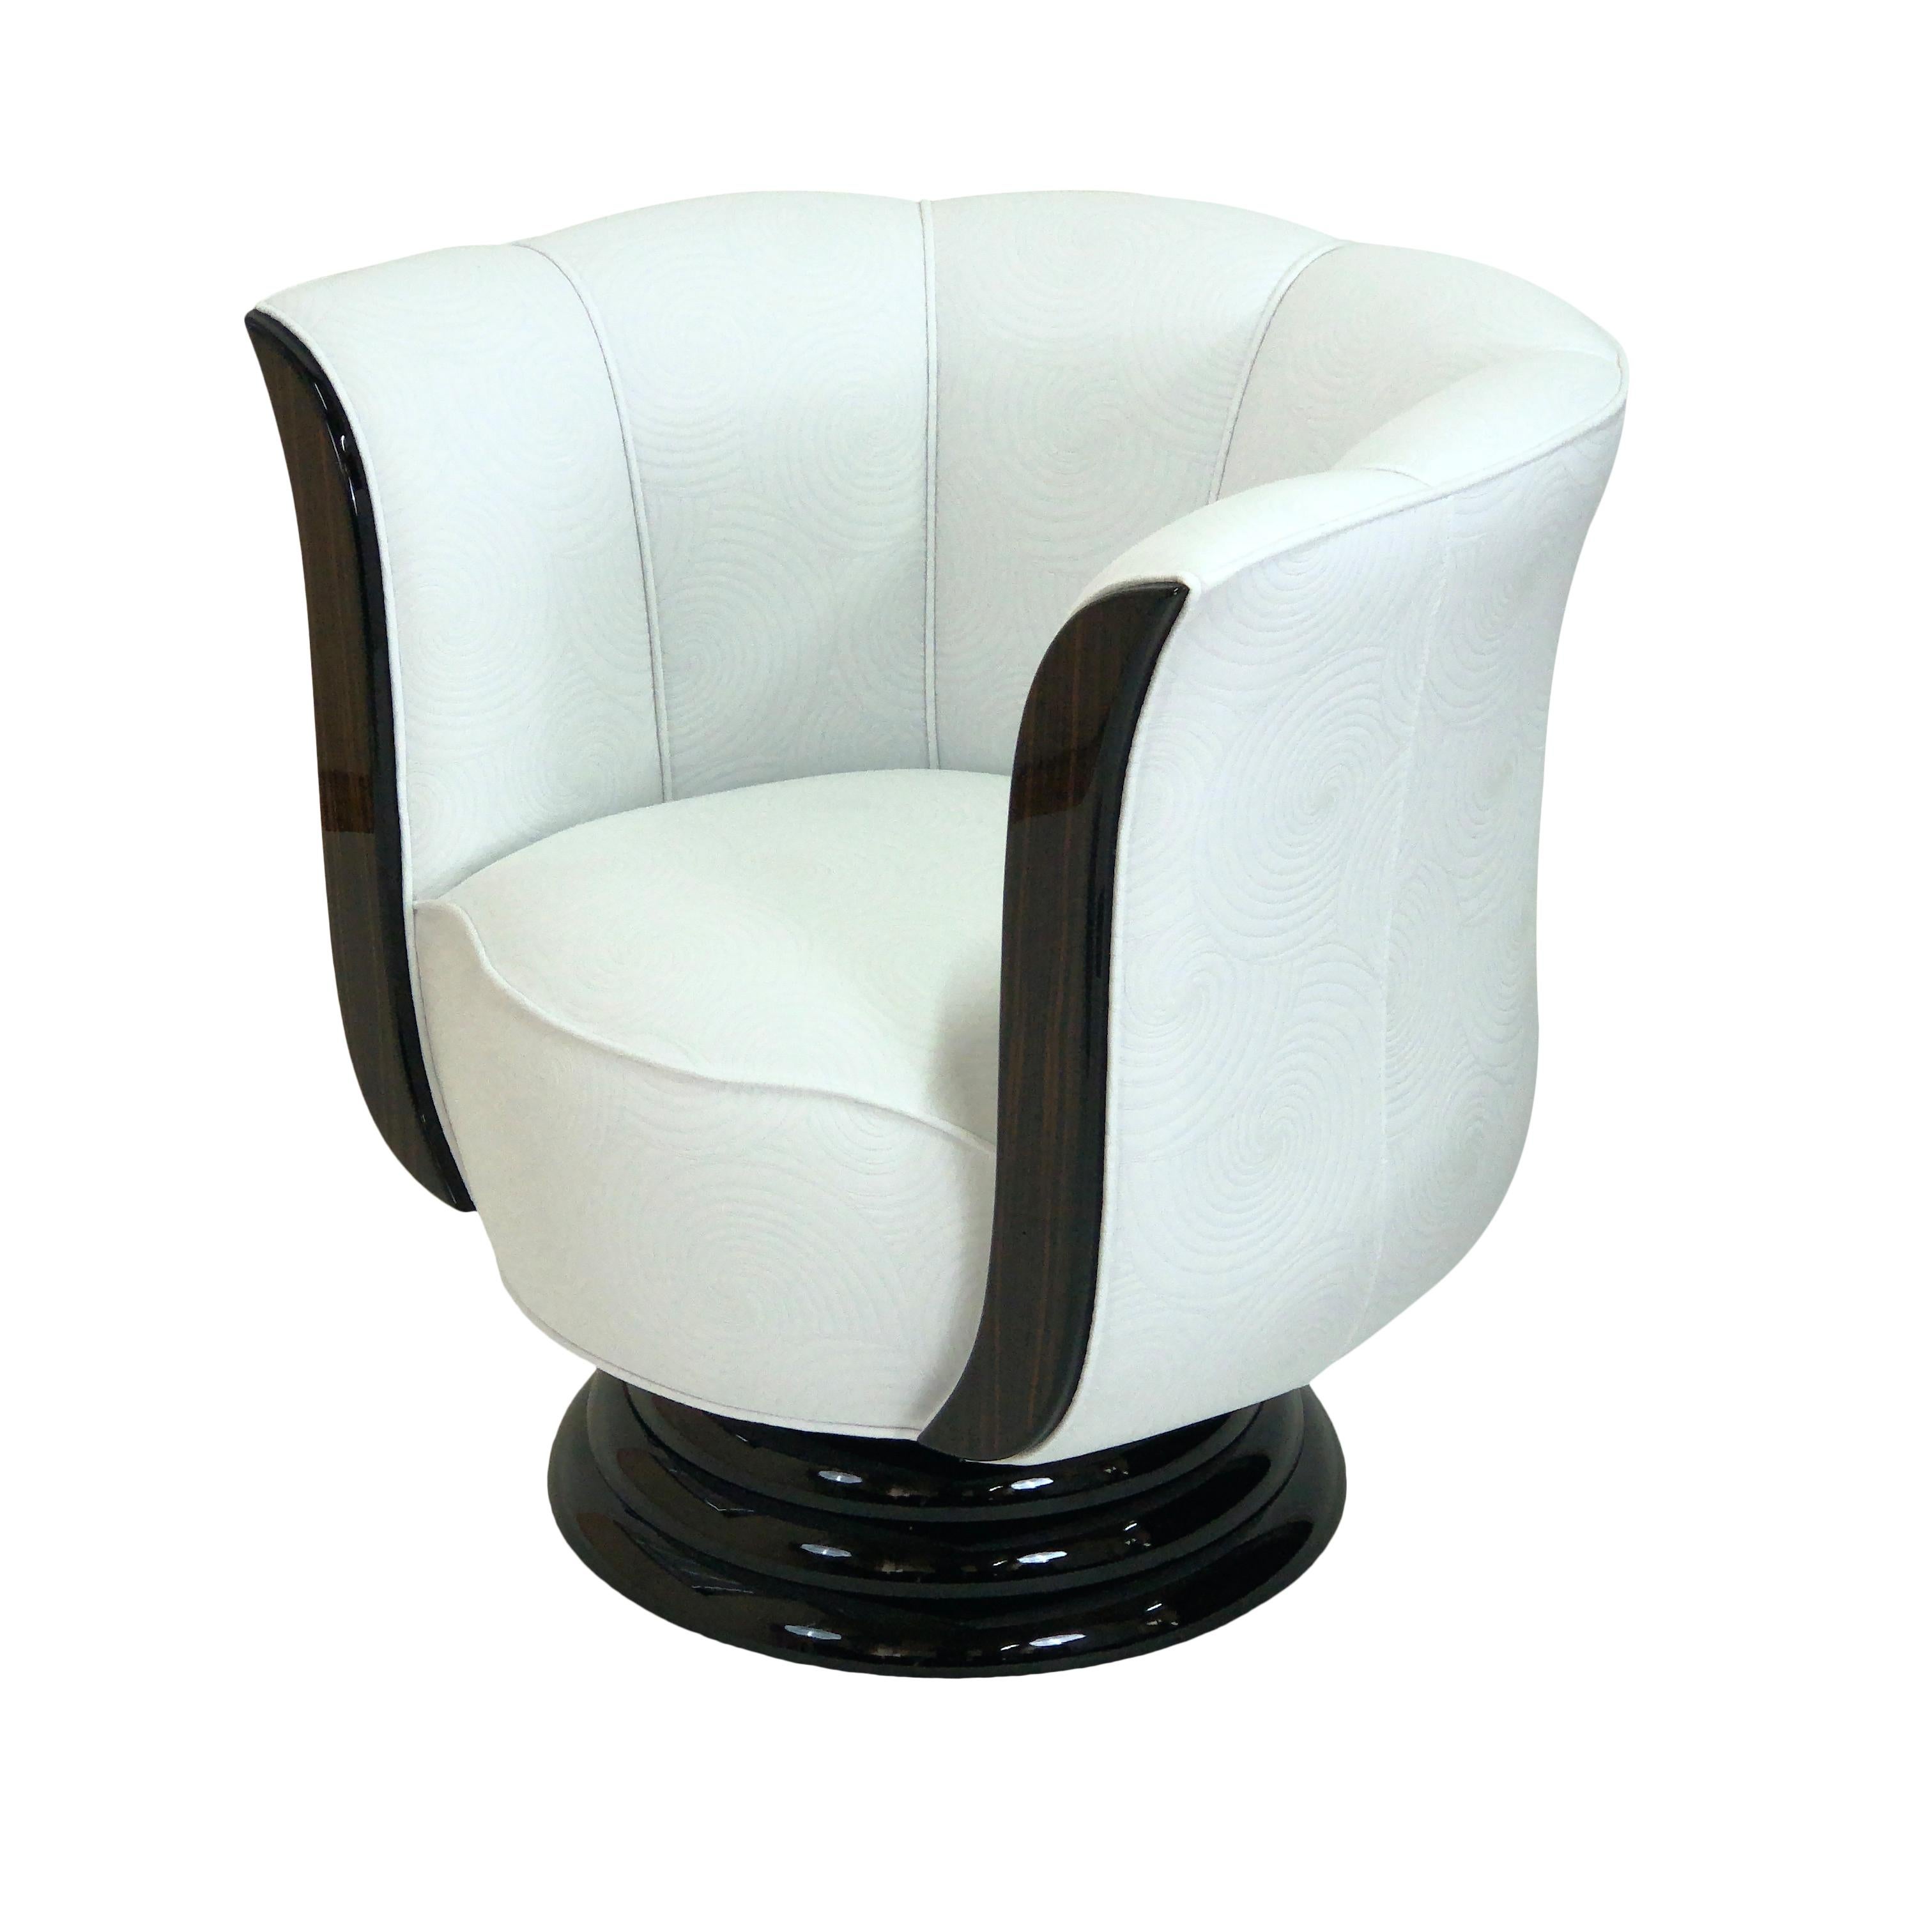 Typical tulip shaped Art Deco style club chair on a round, revolving base.
Excellent seating comfort with high quality upholstery.

Handmade in Germany. 

Lacquered wood.
Black lacquered base.
Upholstery with spiral pattern. 

Different